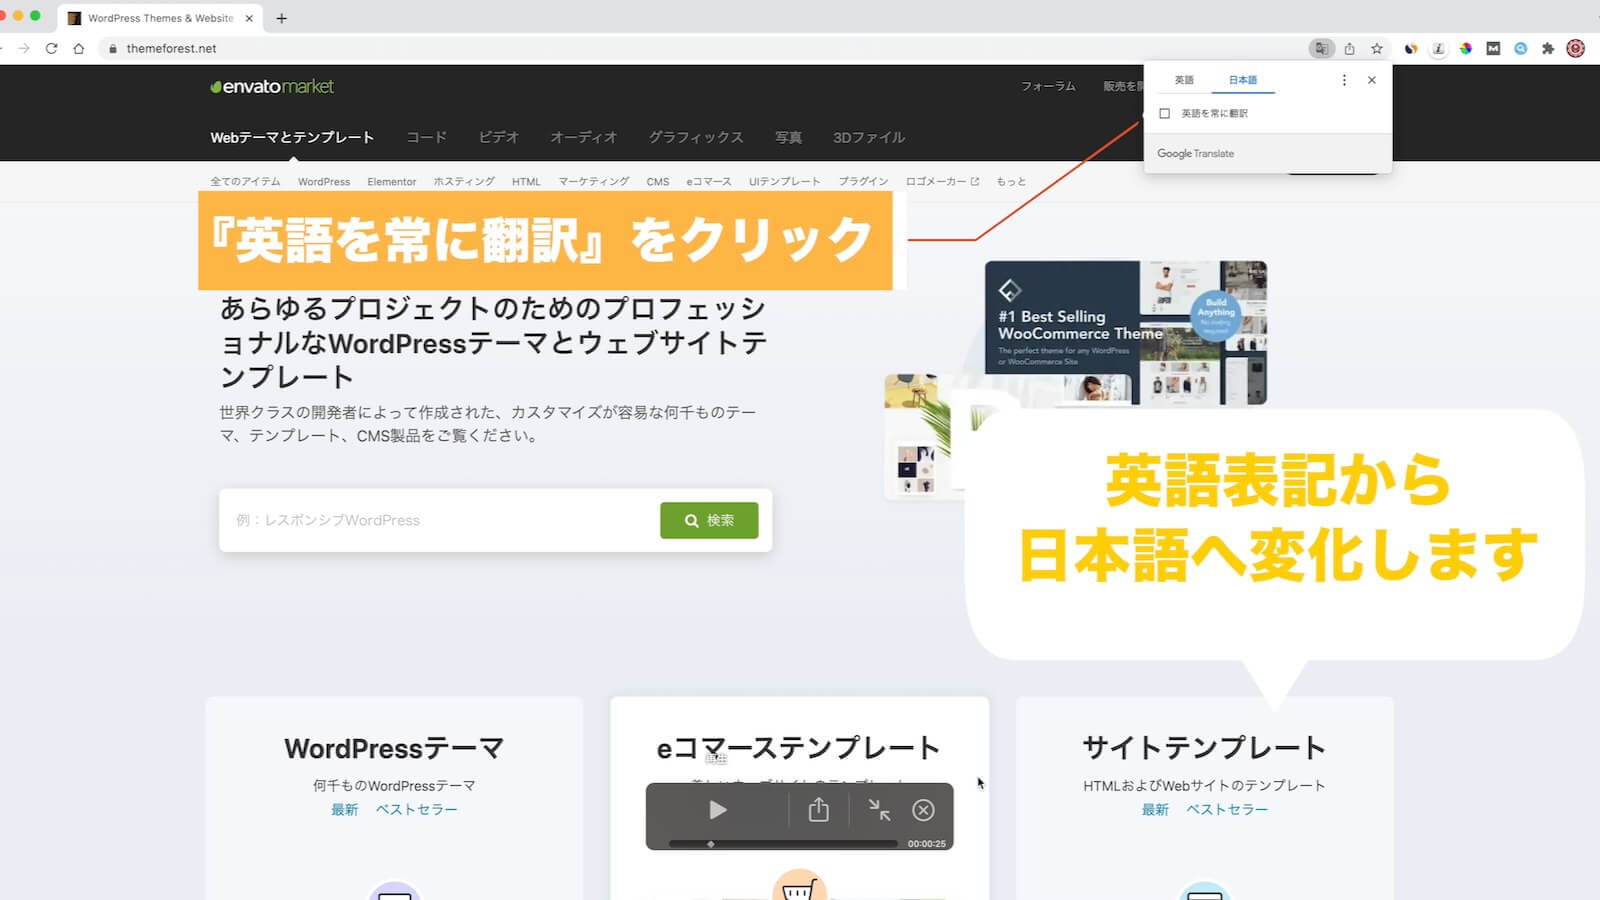 envato market homepage Japanese translation screen with Chrome